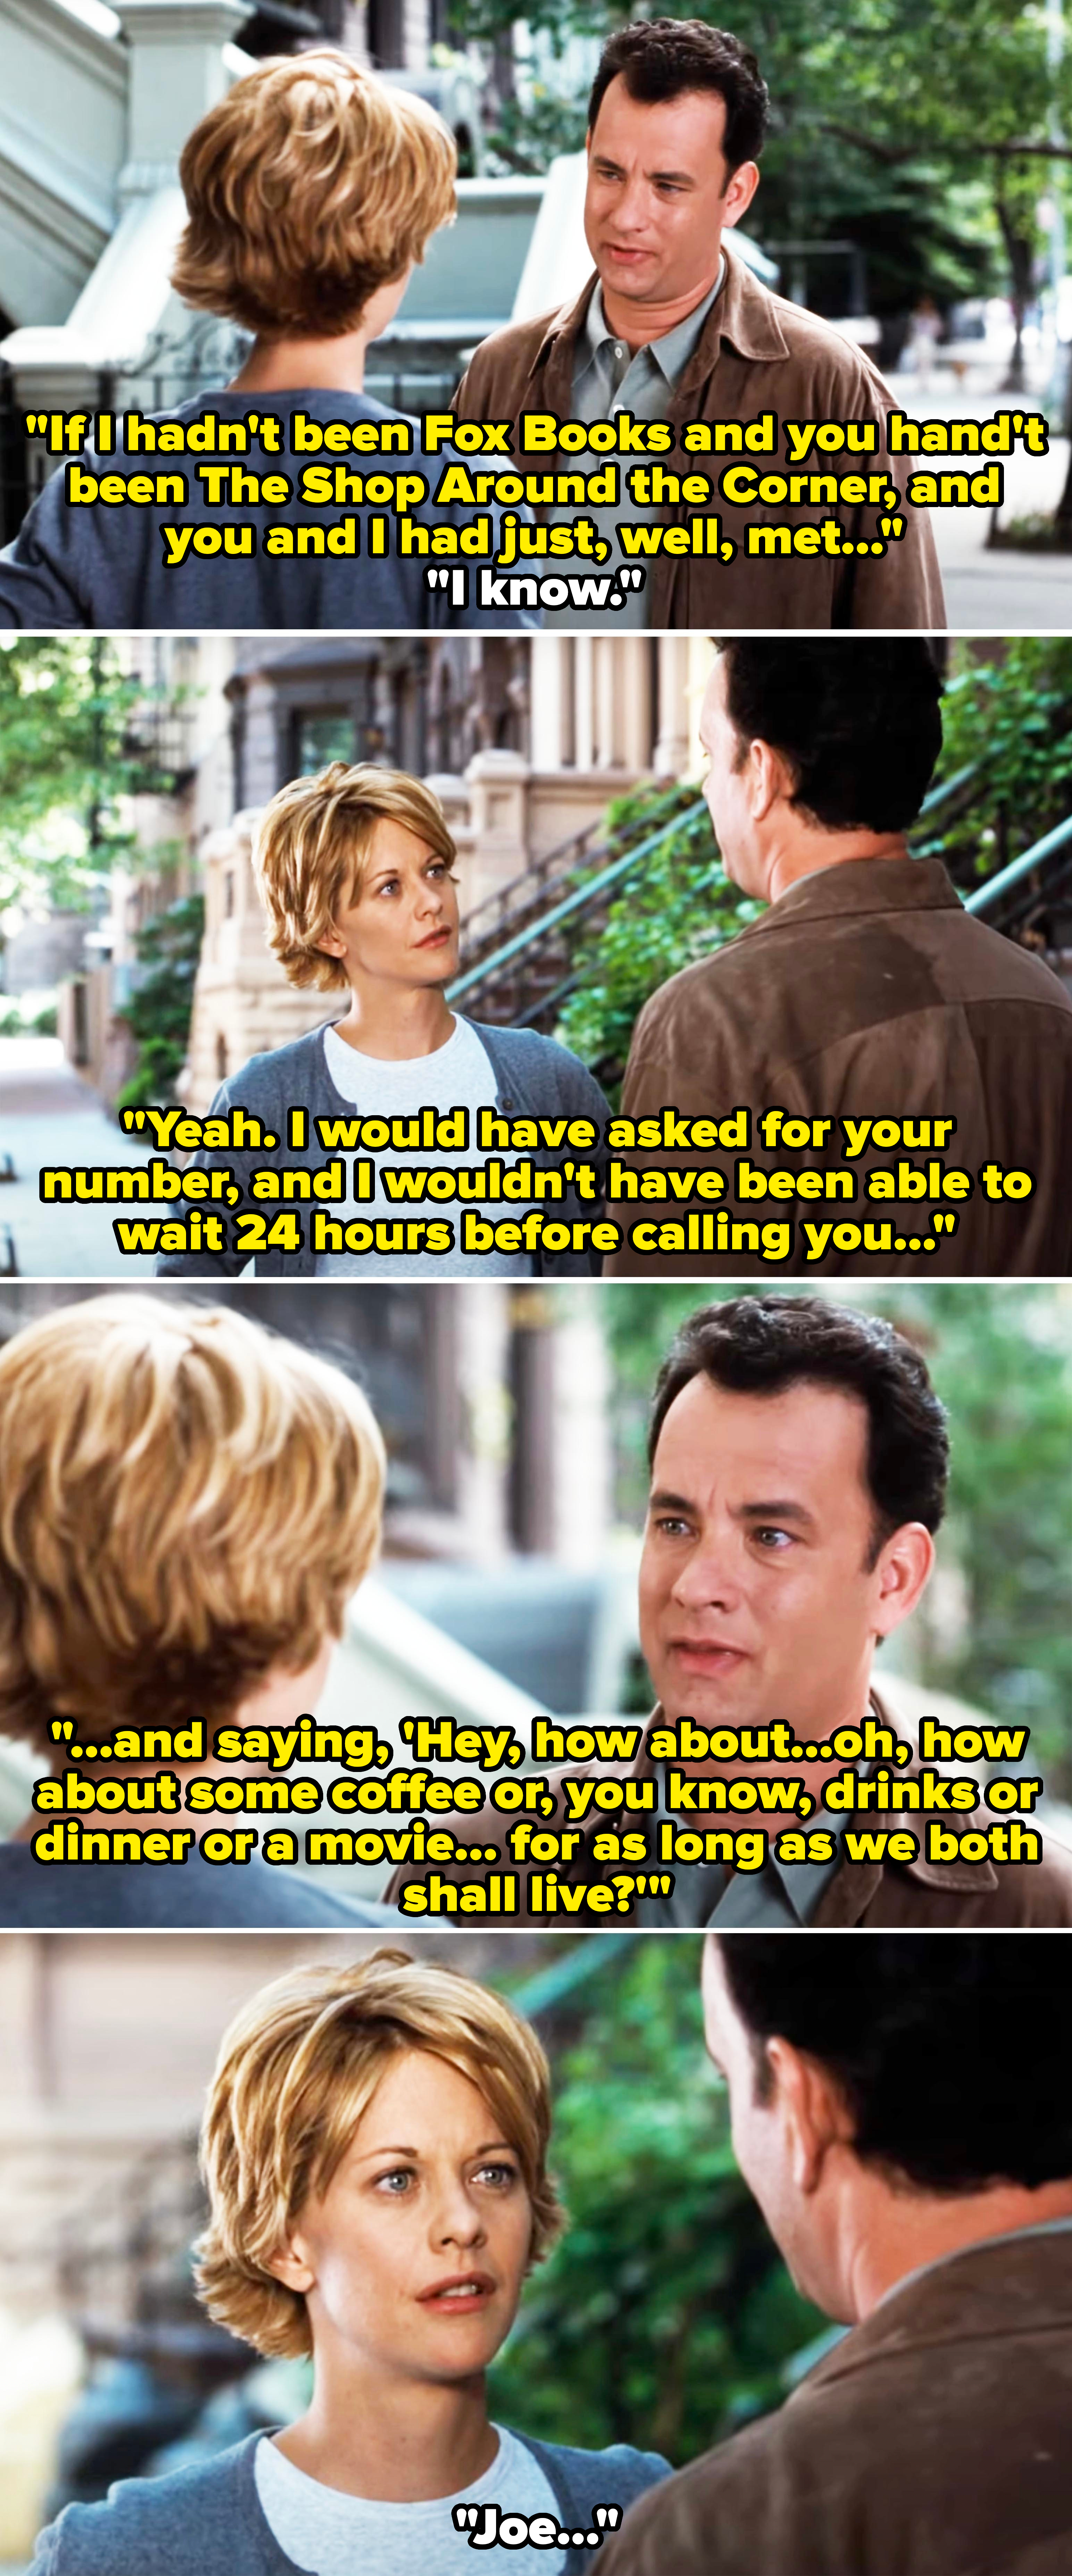 Tom Hanks and Meg Ryan are engaged in a conversation on a city sidewalk scene from the movie &quot;You&#x27;ve Got Mail.&quot;